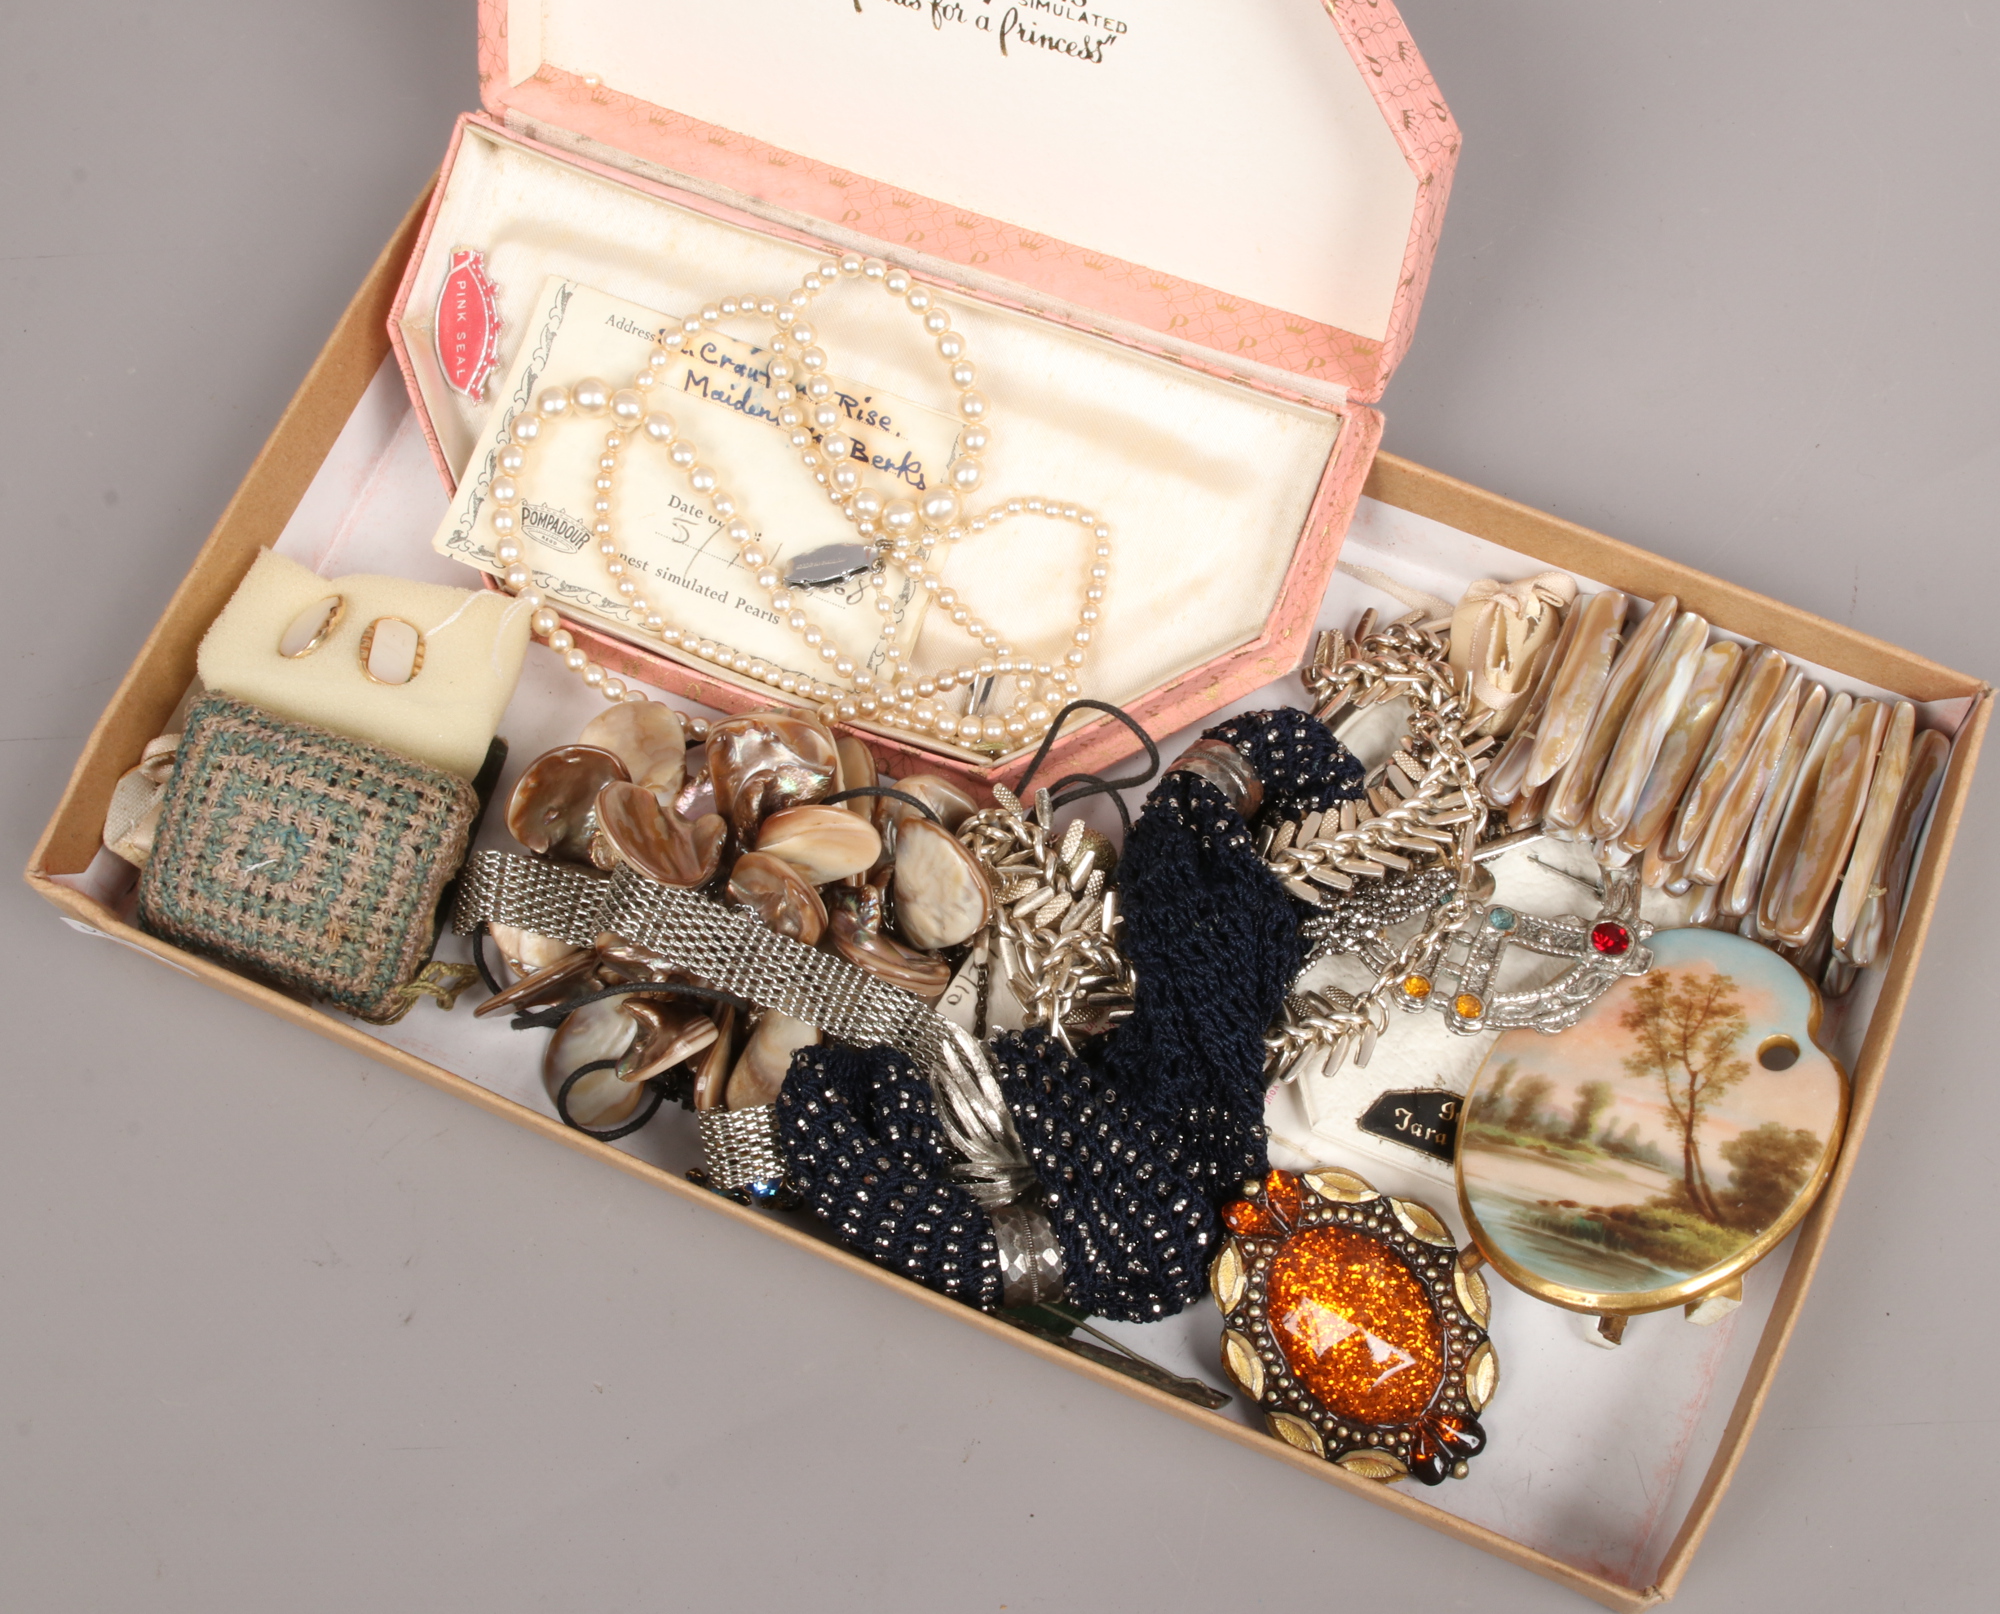 A box of costume jewellery to include simulated pearls, bracelets, brooches, cufflinks etc.